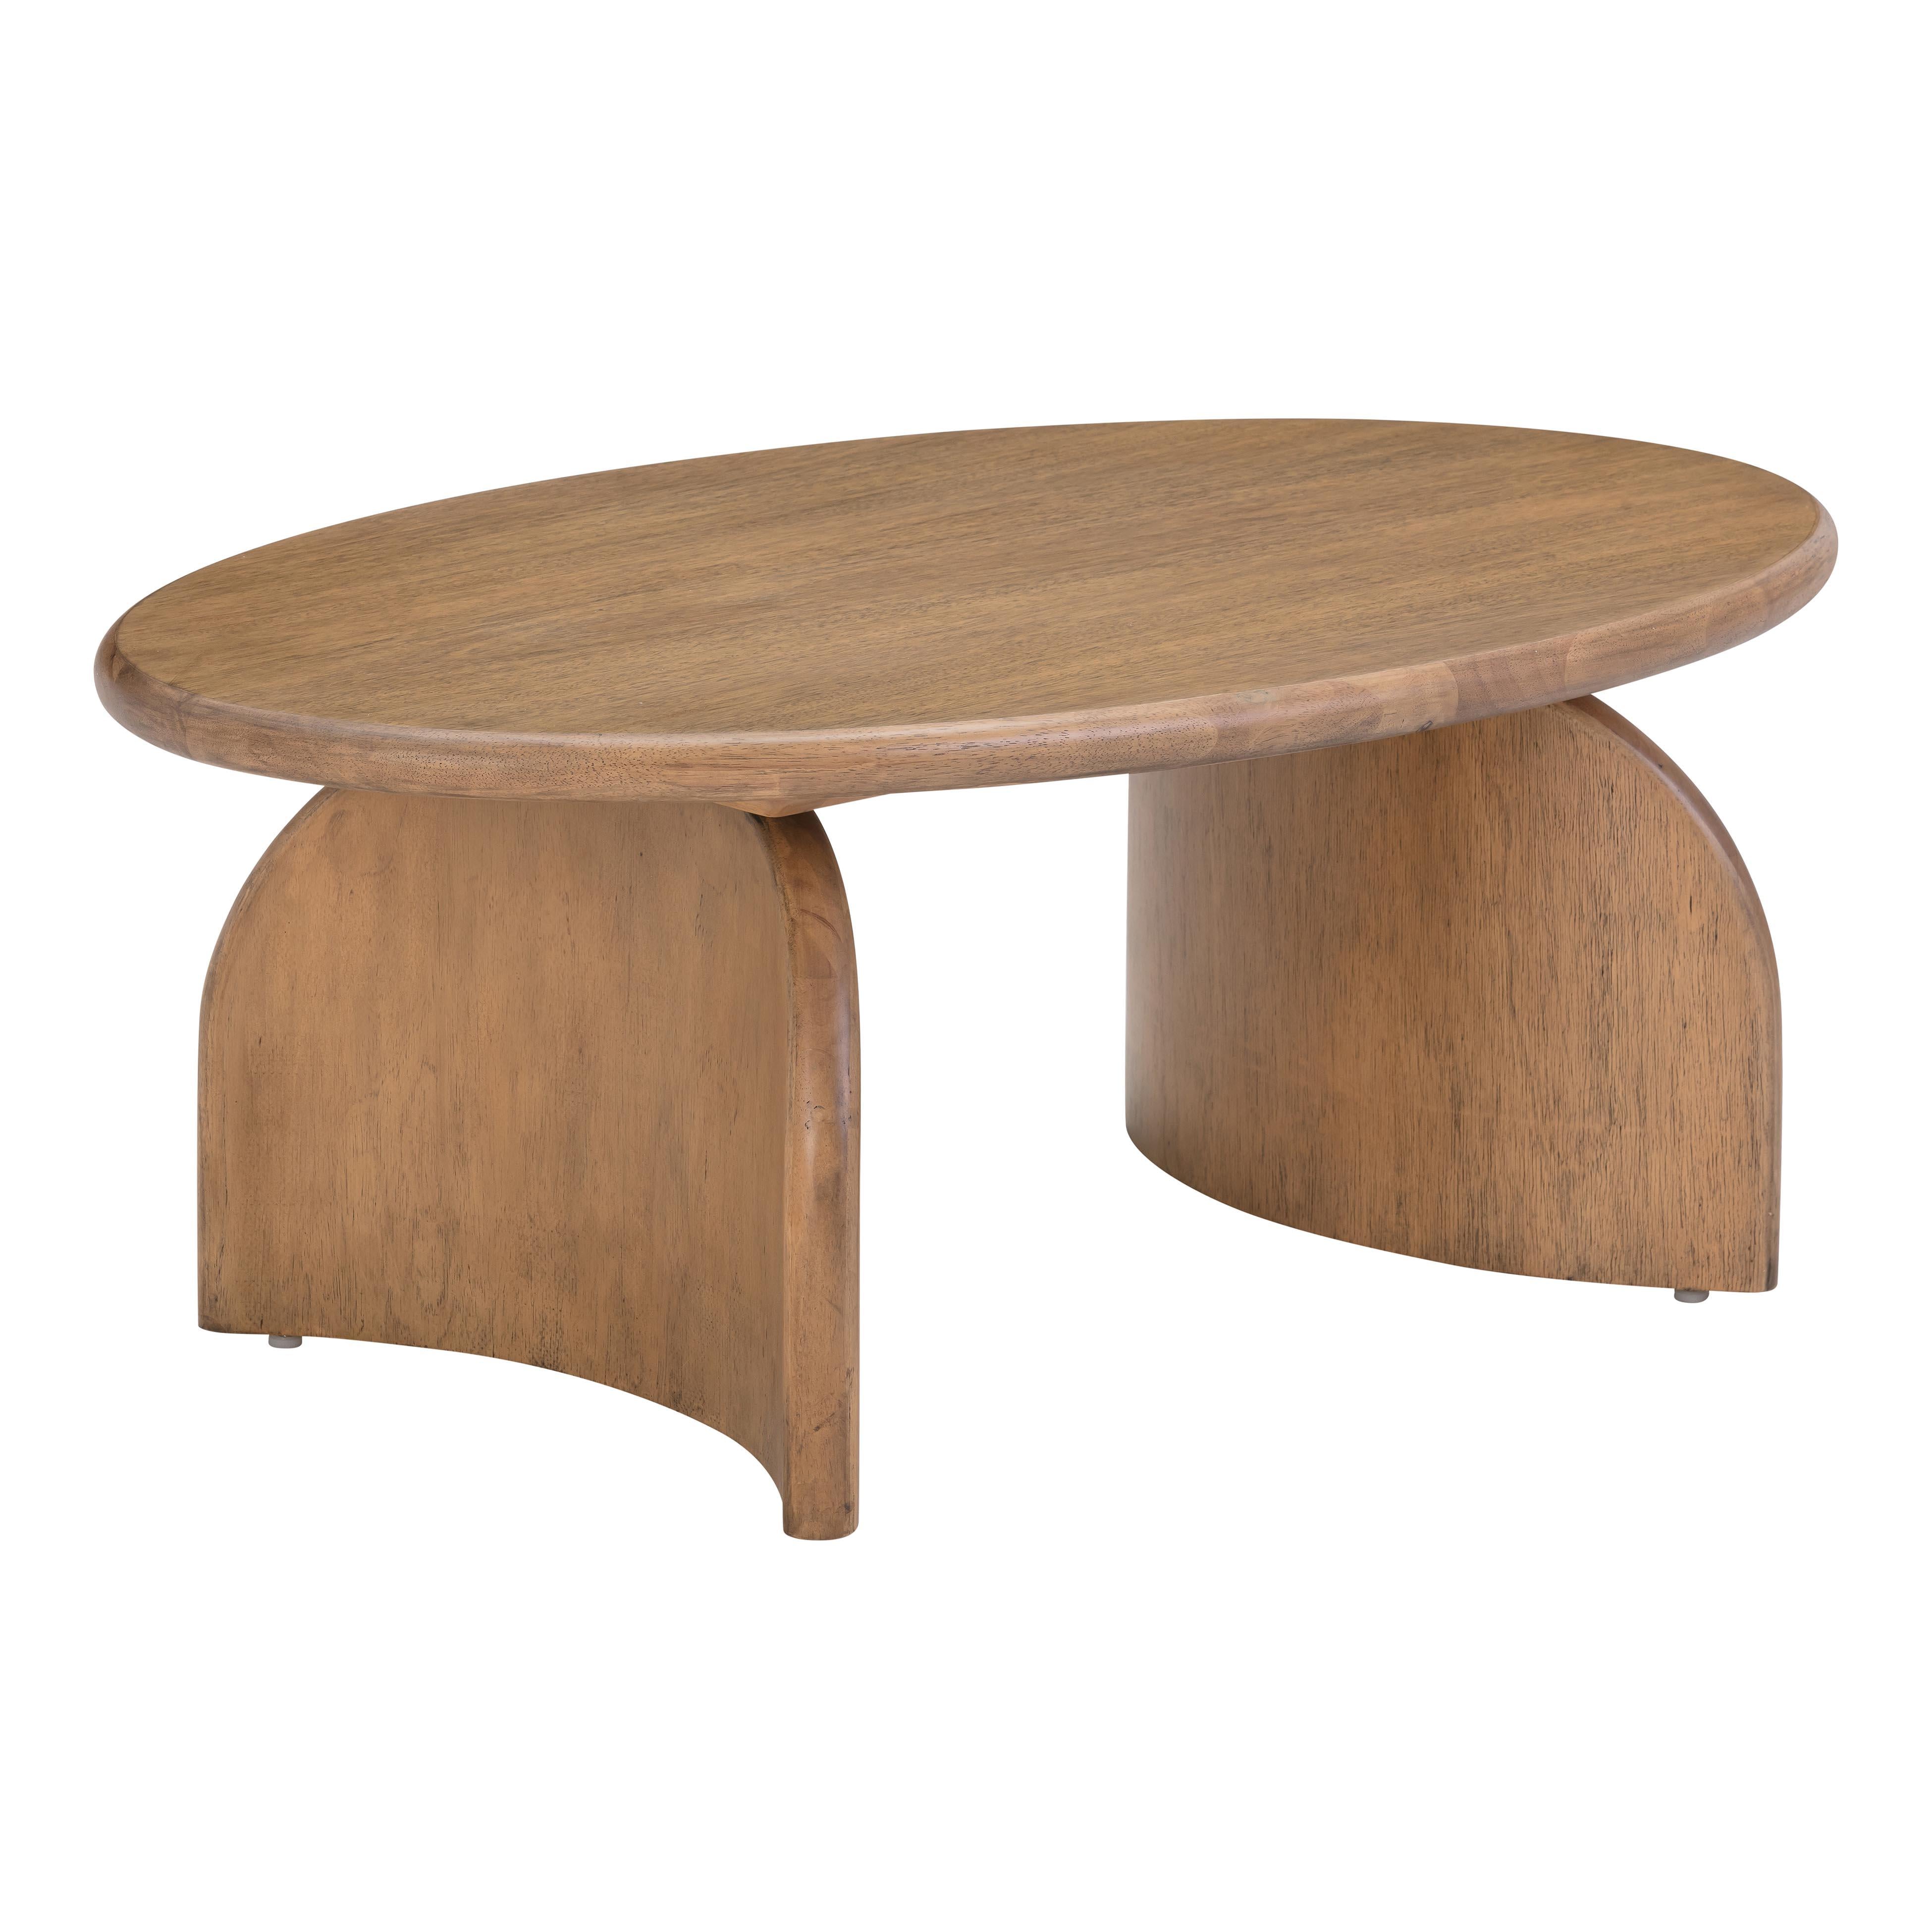 Tov Furniture Coffee Tables - Sofia Cognac Wooden Coffee Table